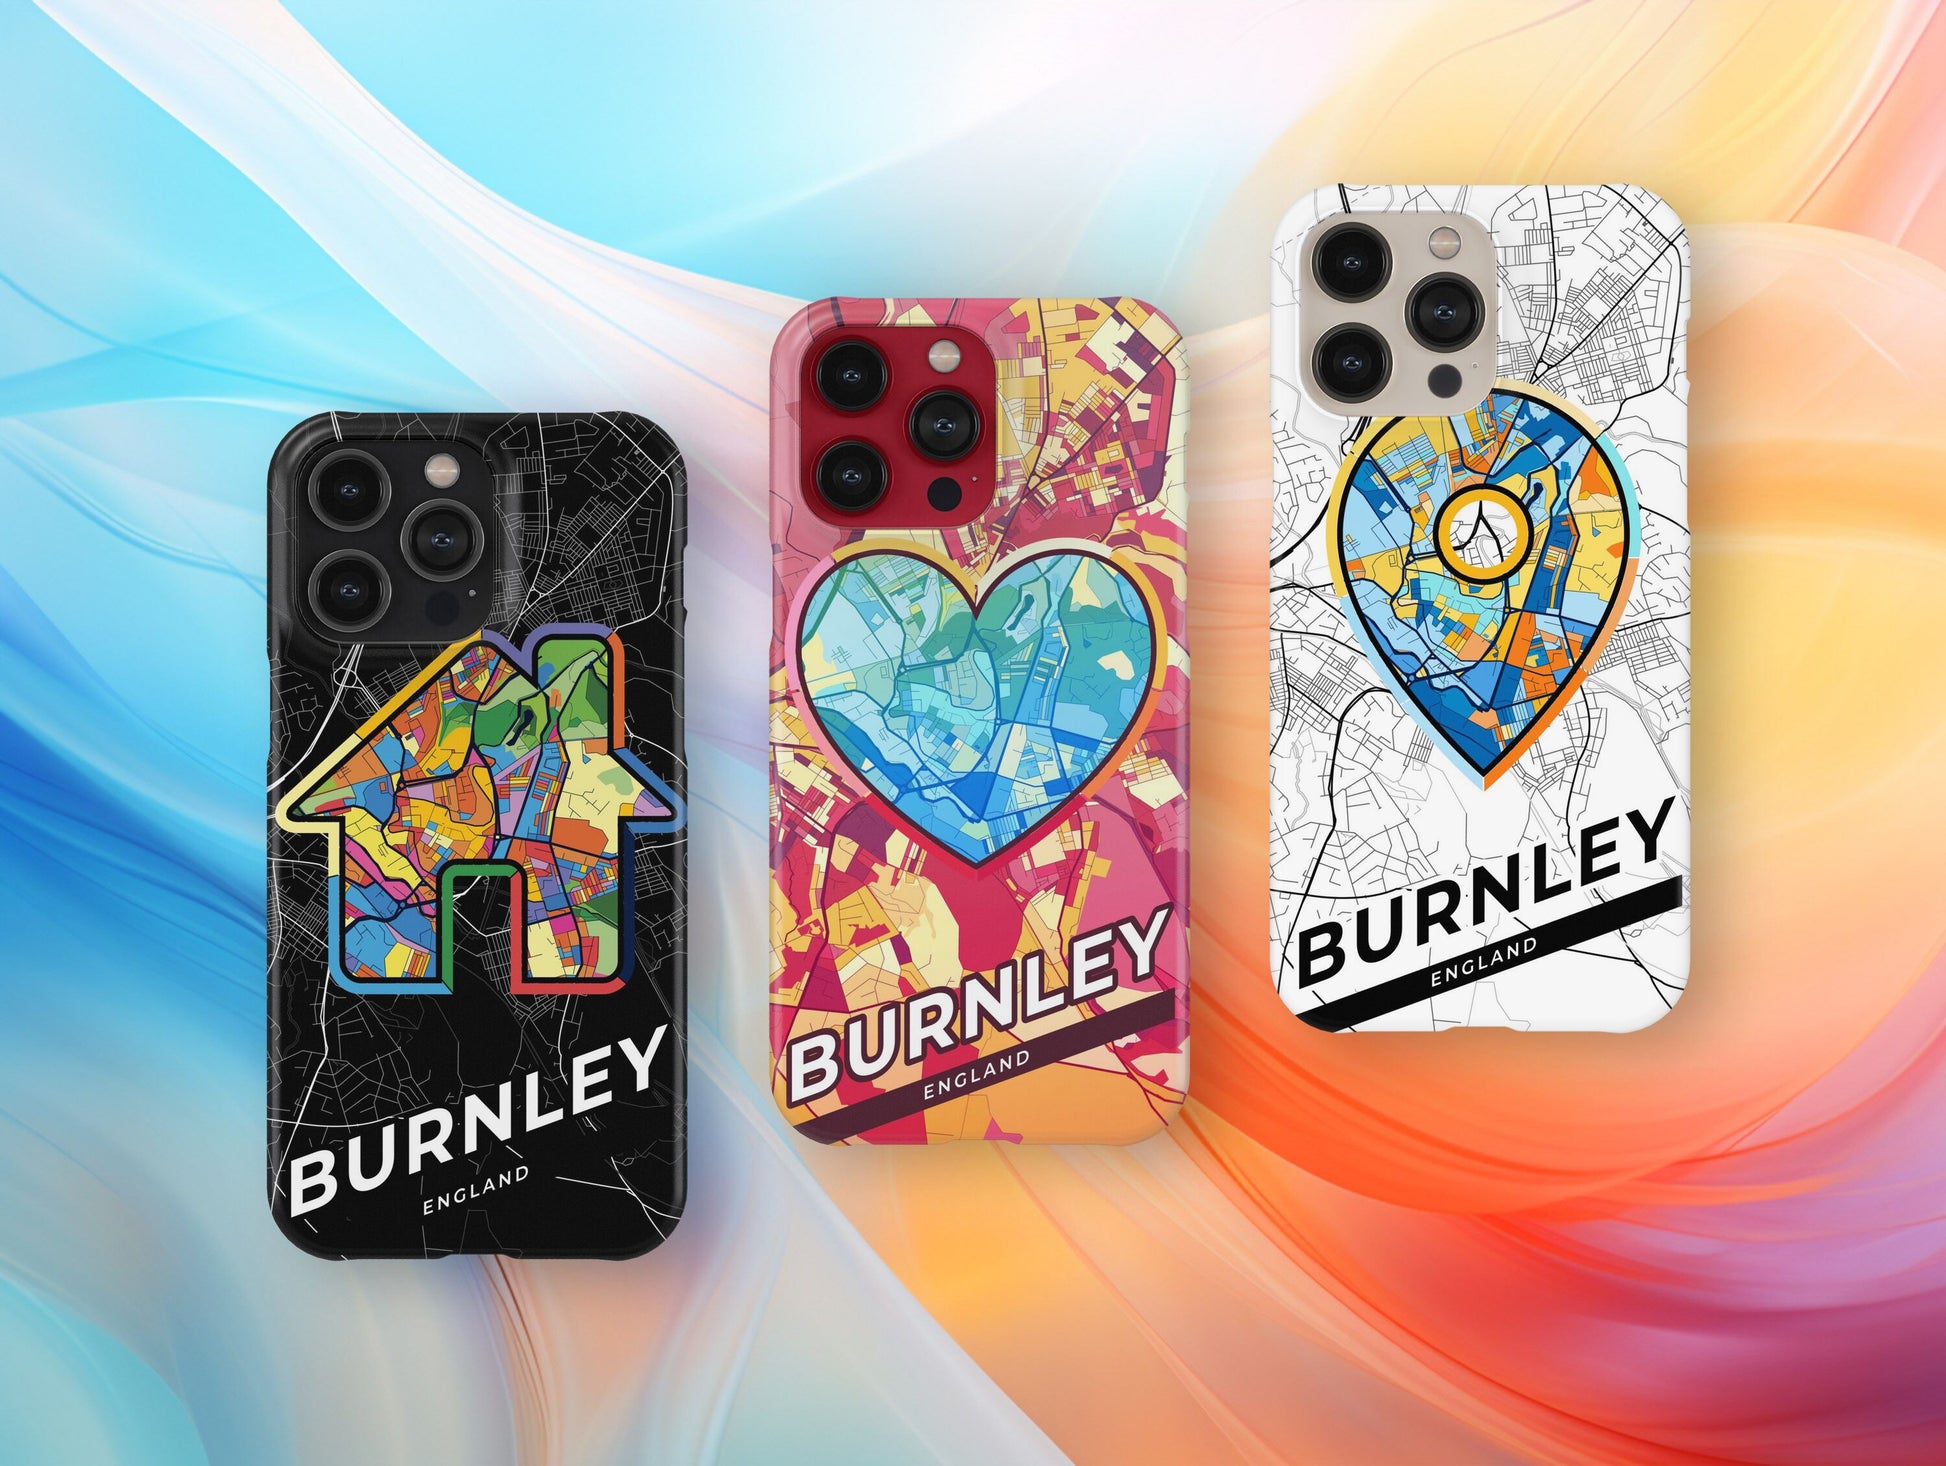 Burnley England slim phone case with colorful icon. Birthday, wedding or housewarming gift. Couple match cases.